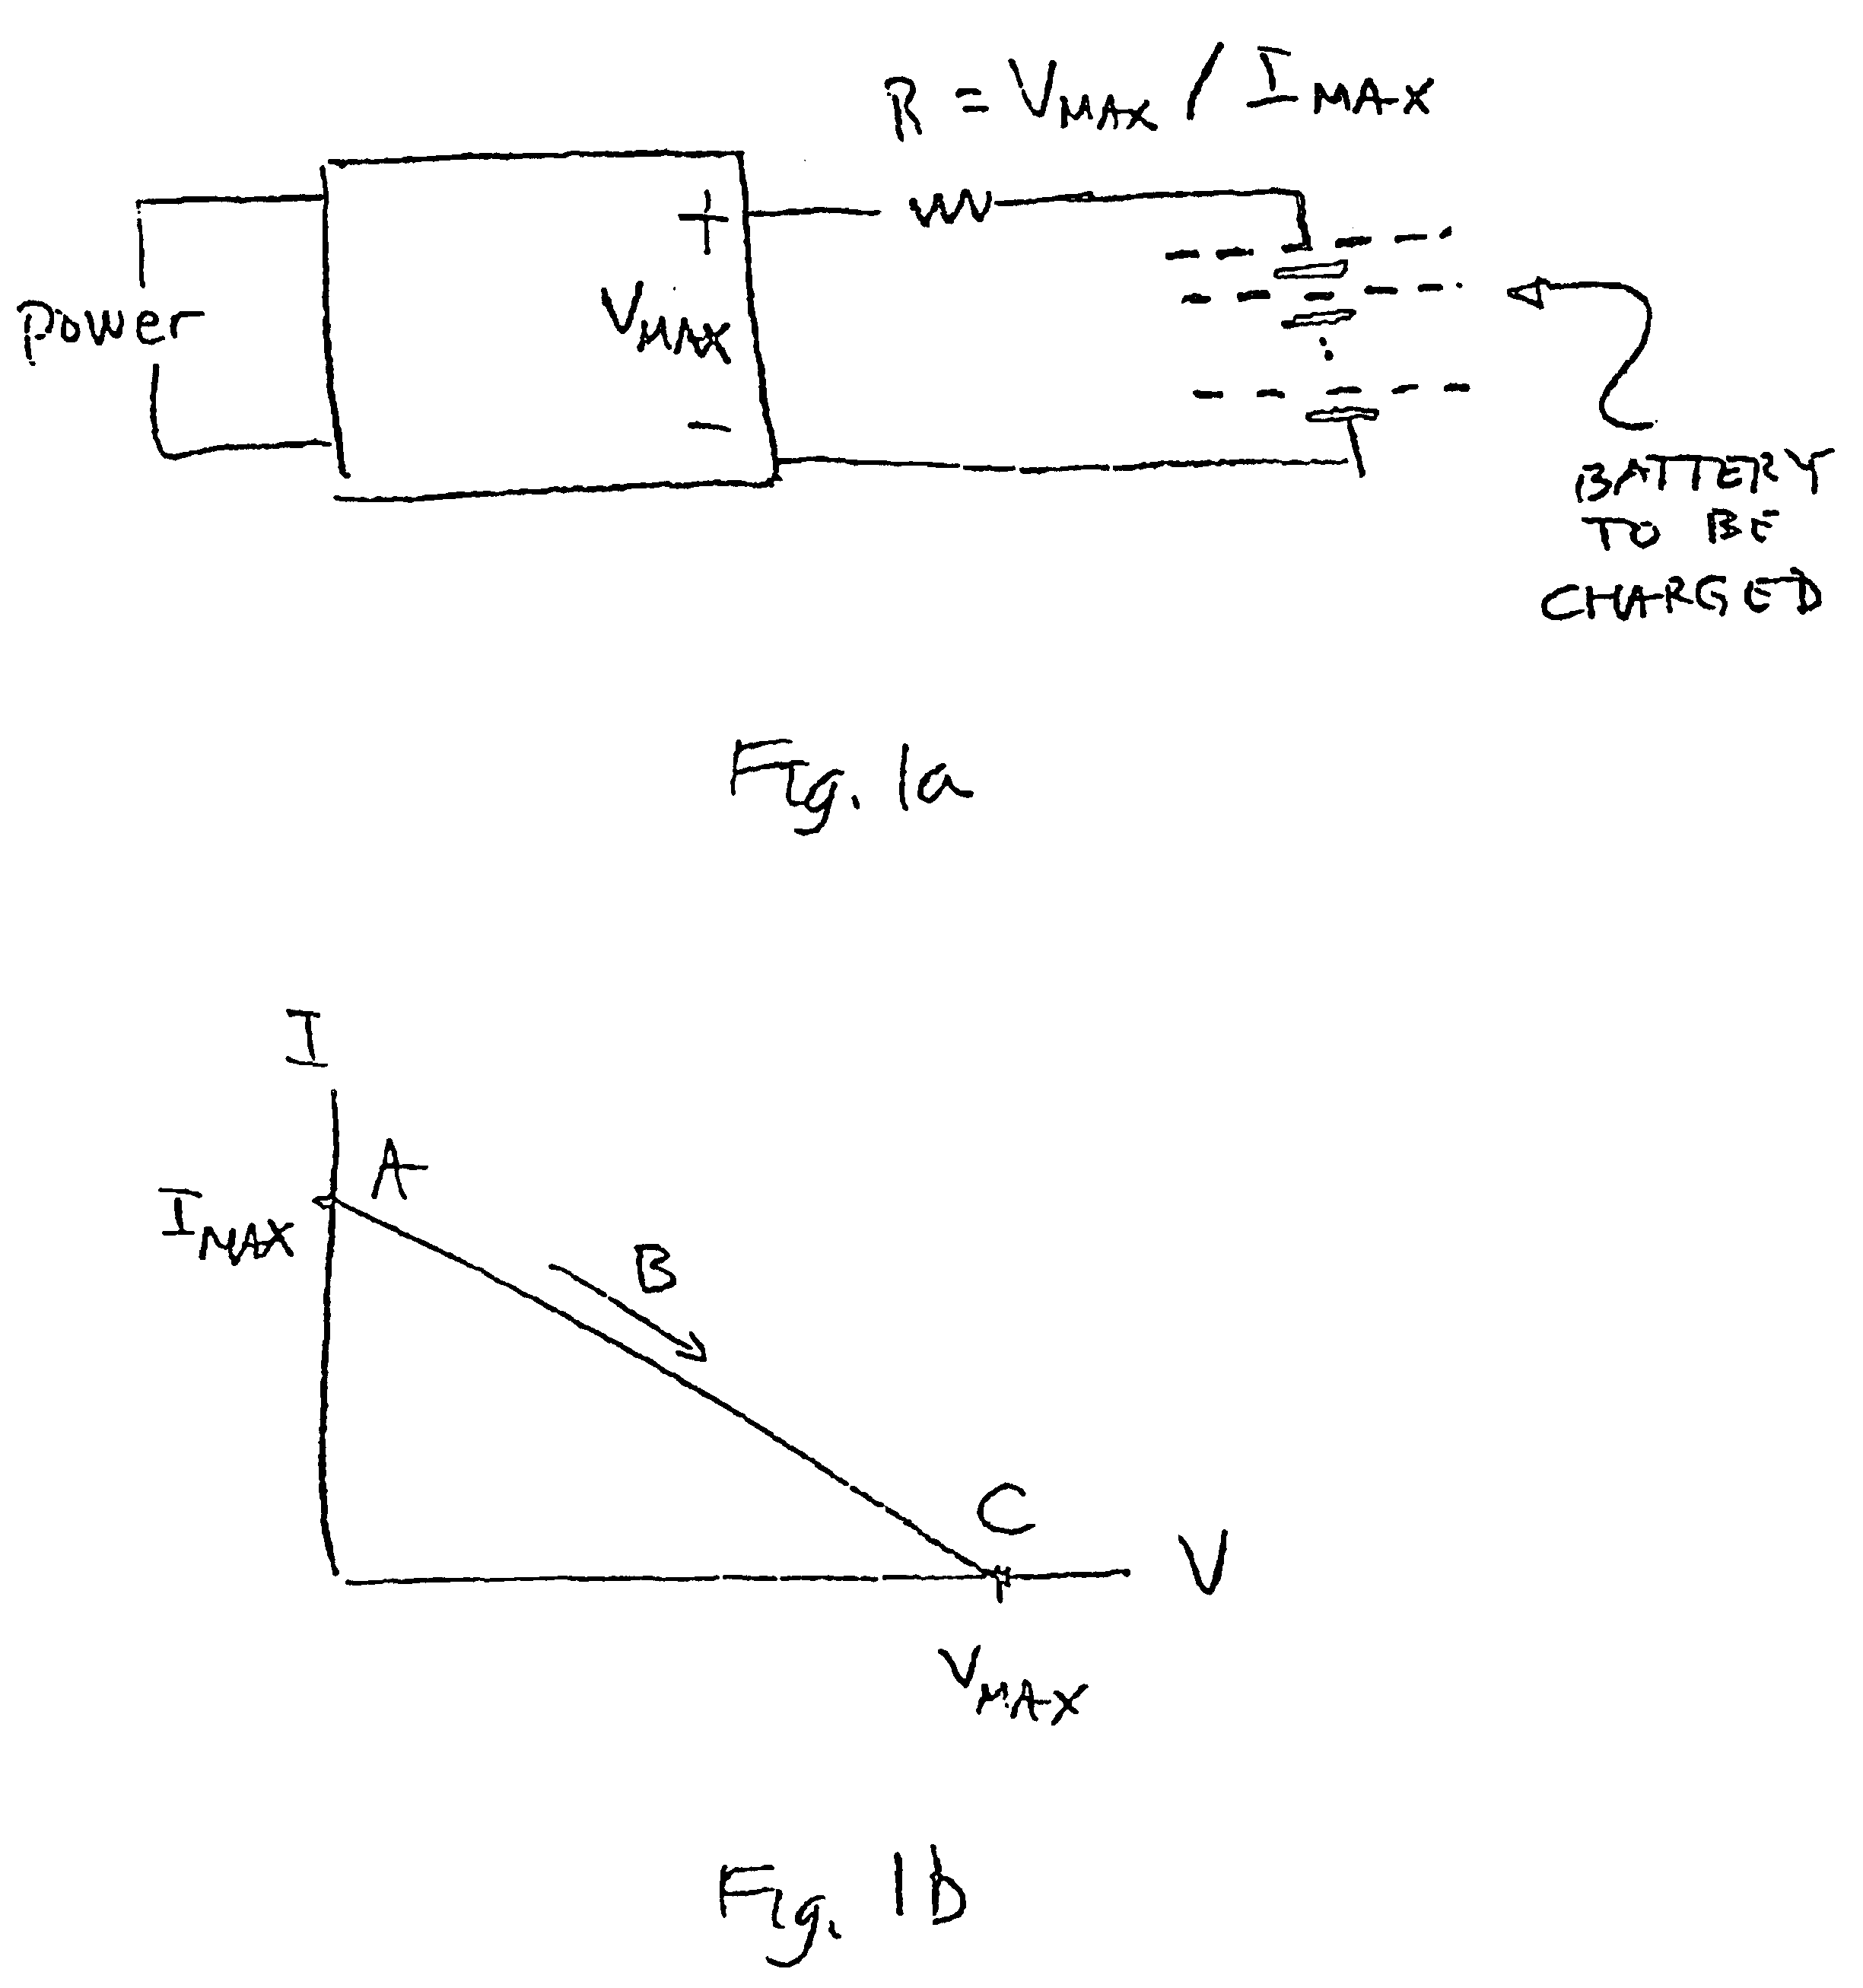 Method of controlling the charging of a battery